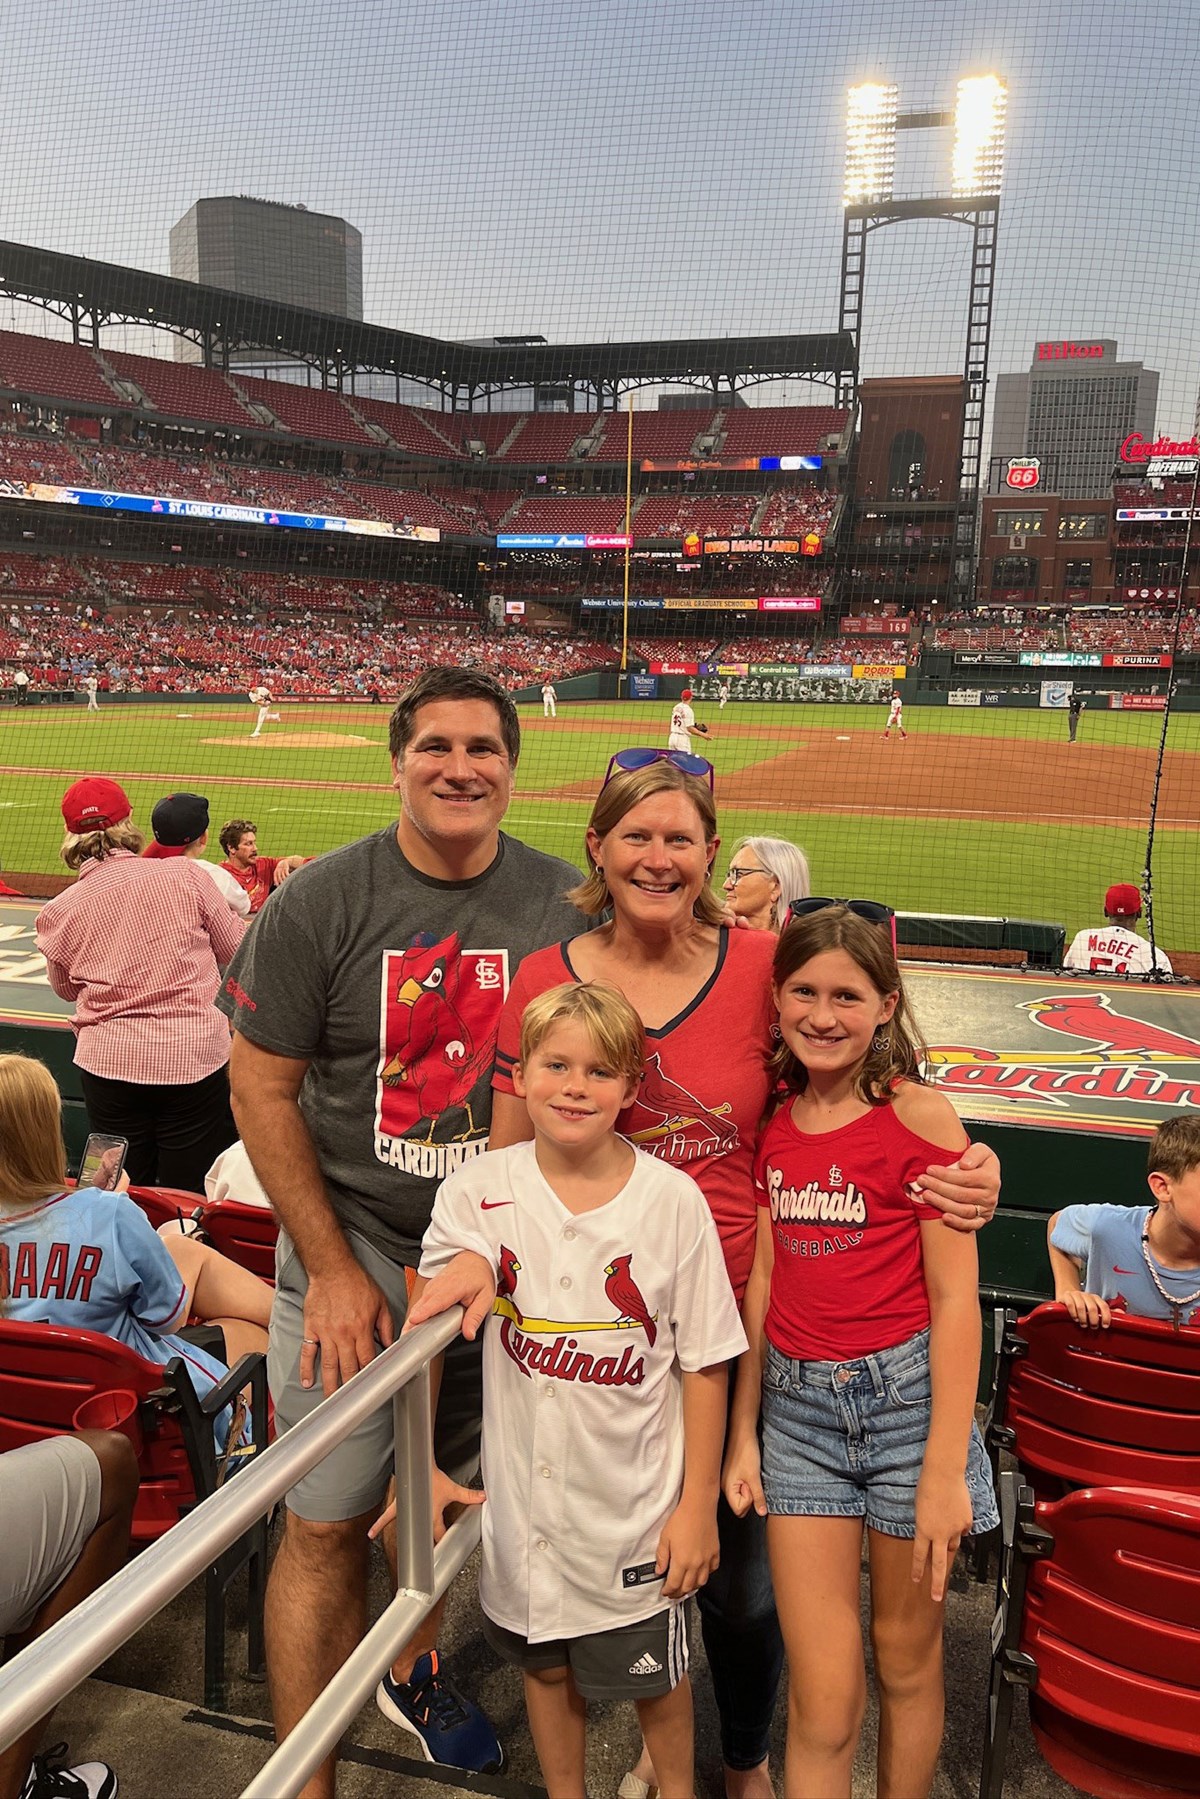 Becky O'Hara and her family at a St. Louis Cardinals baseball game in the evening. 